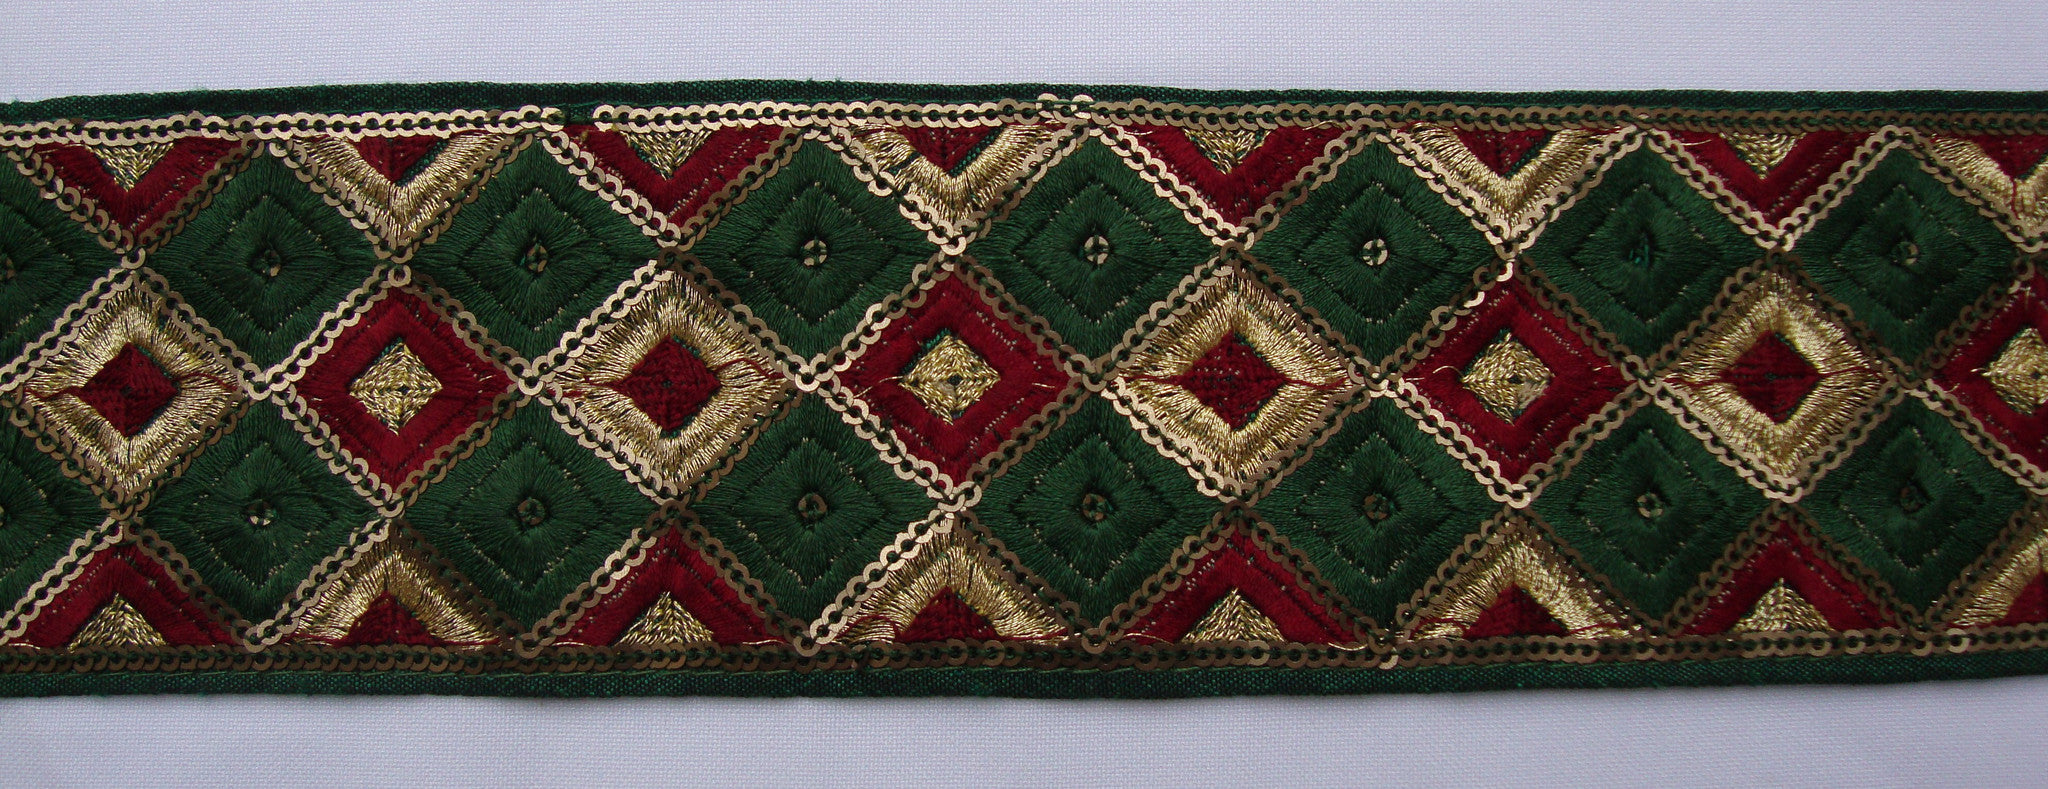 Green & Red Embroidered Trimming (Sold as a 2 yard piece)